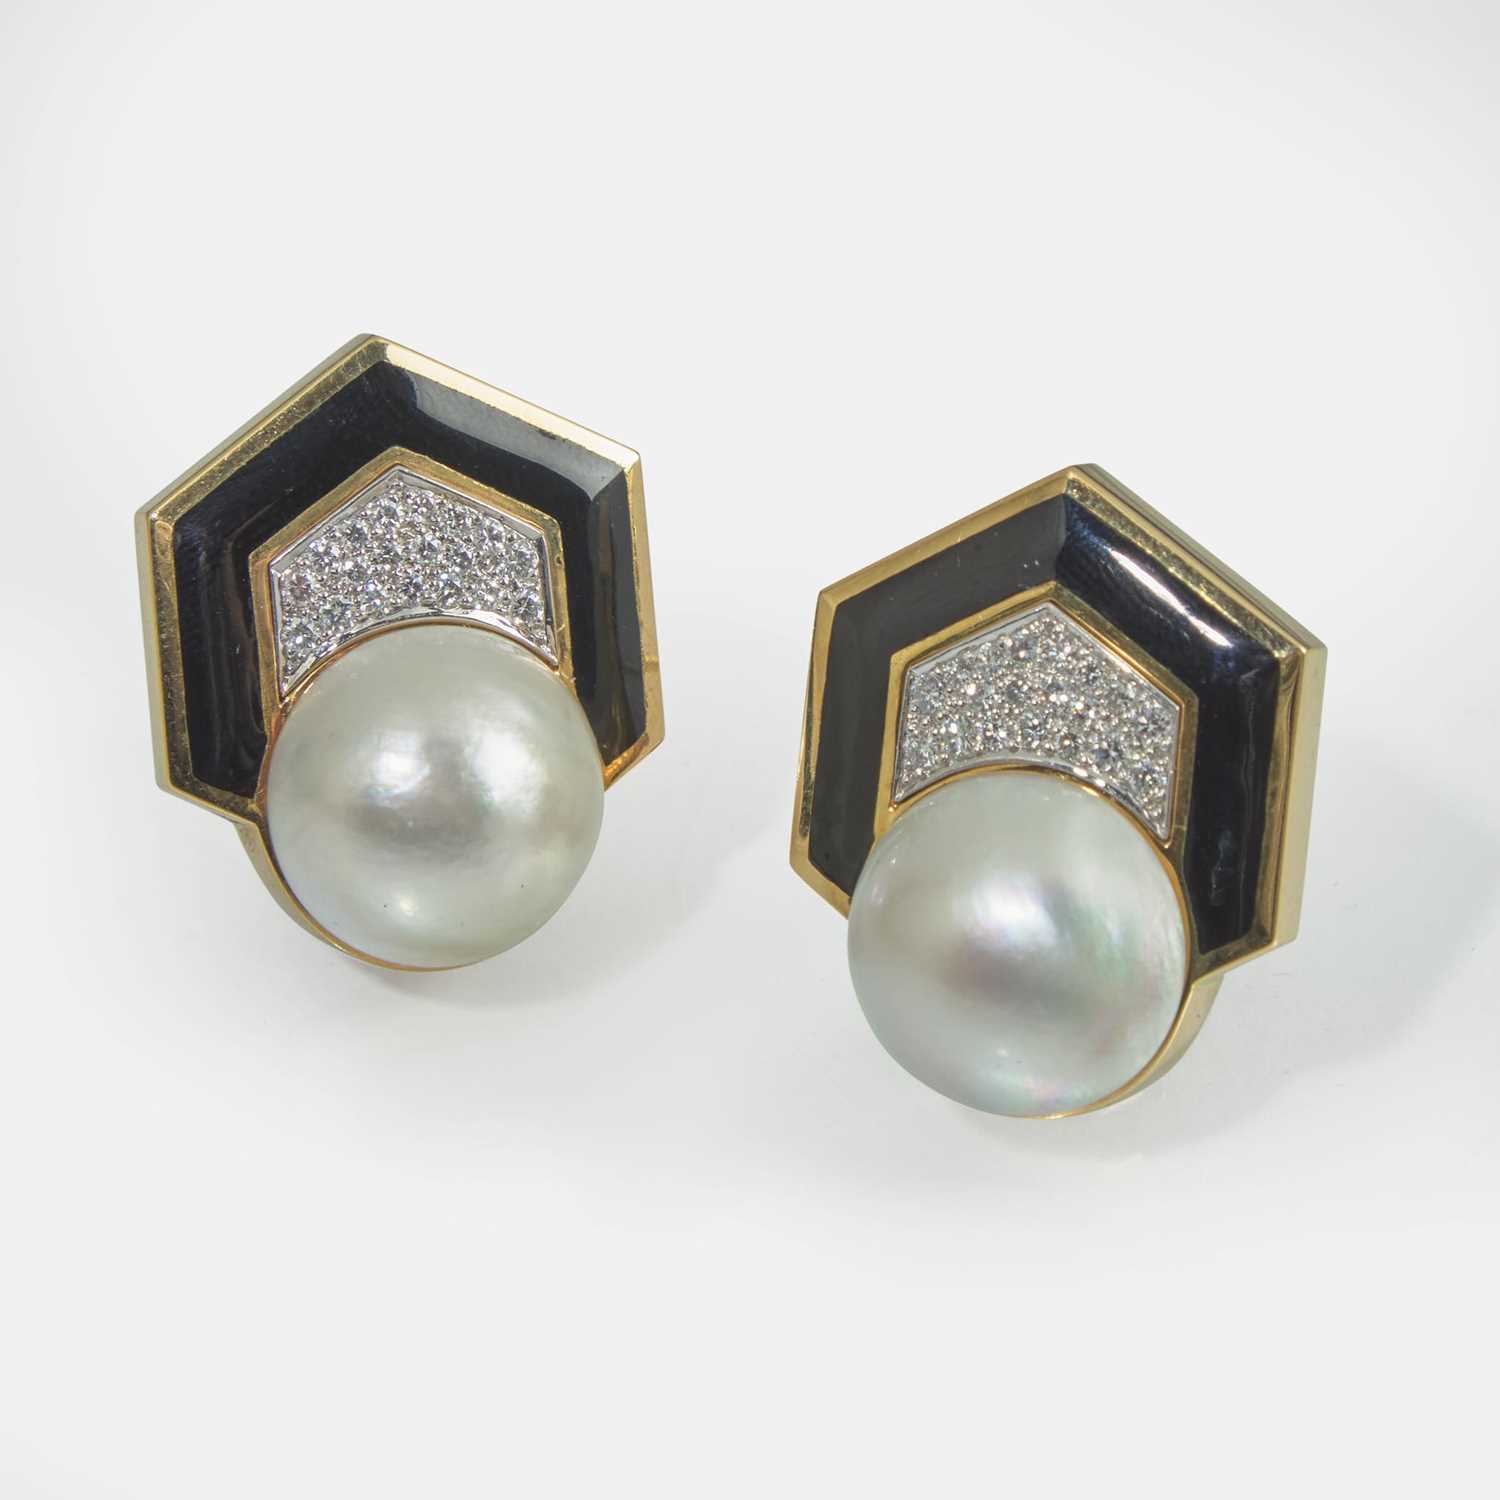 Lot 91 - A Pair of 18K Yellow Gold, Pearl, and Diamond Earrings